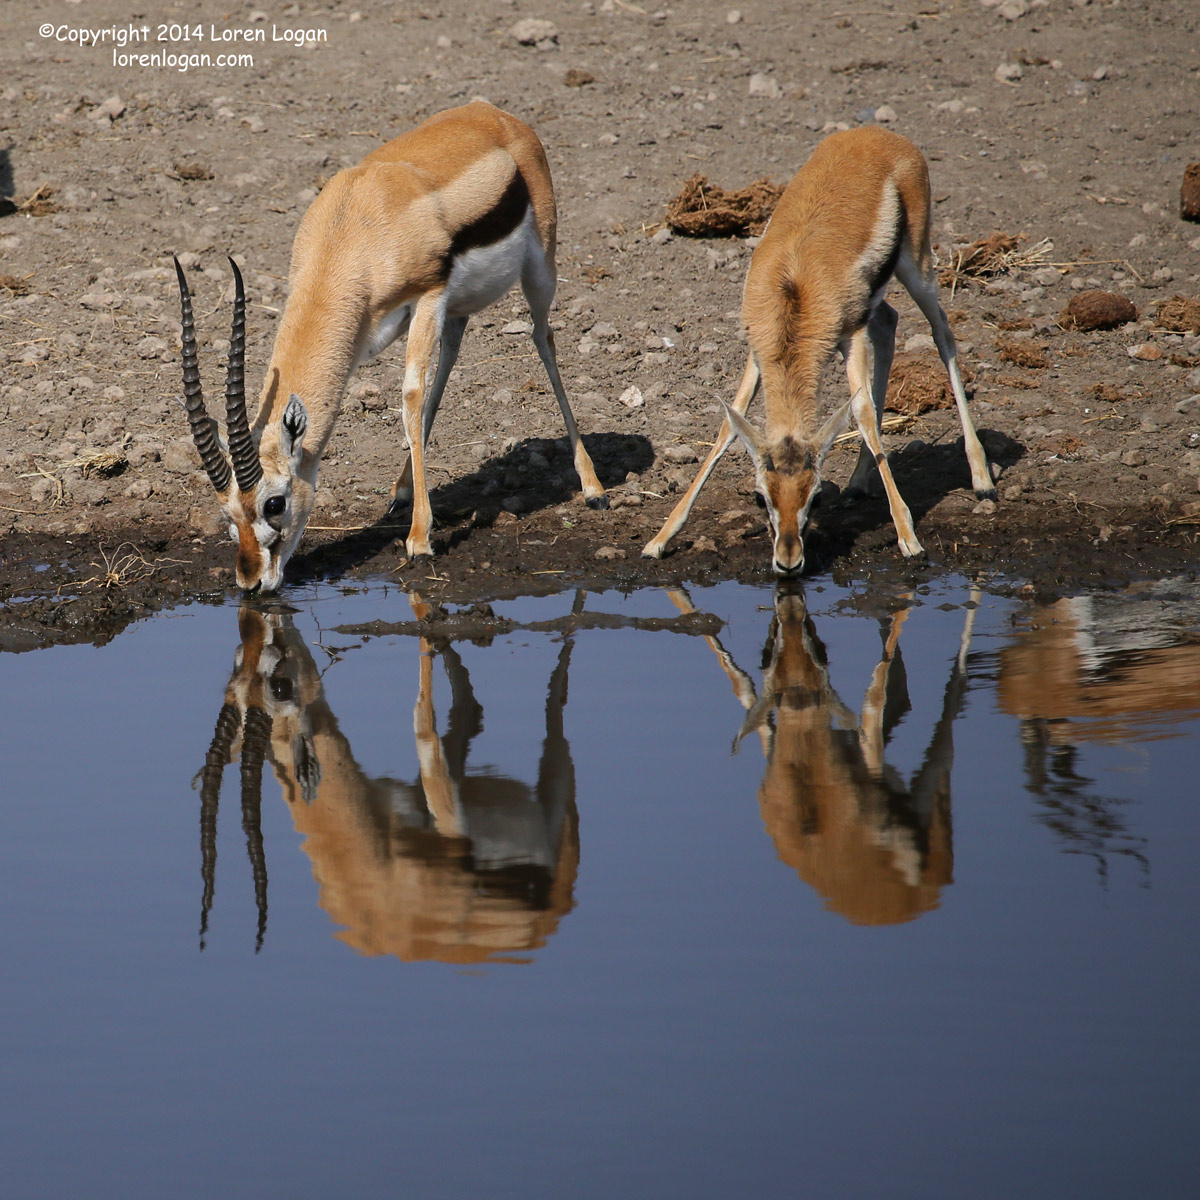 Watering hole reflections show sky and Thomsons Gazelle pausing for a drink.